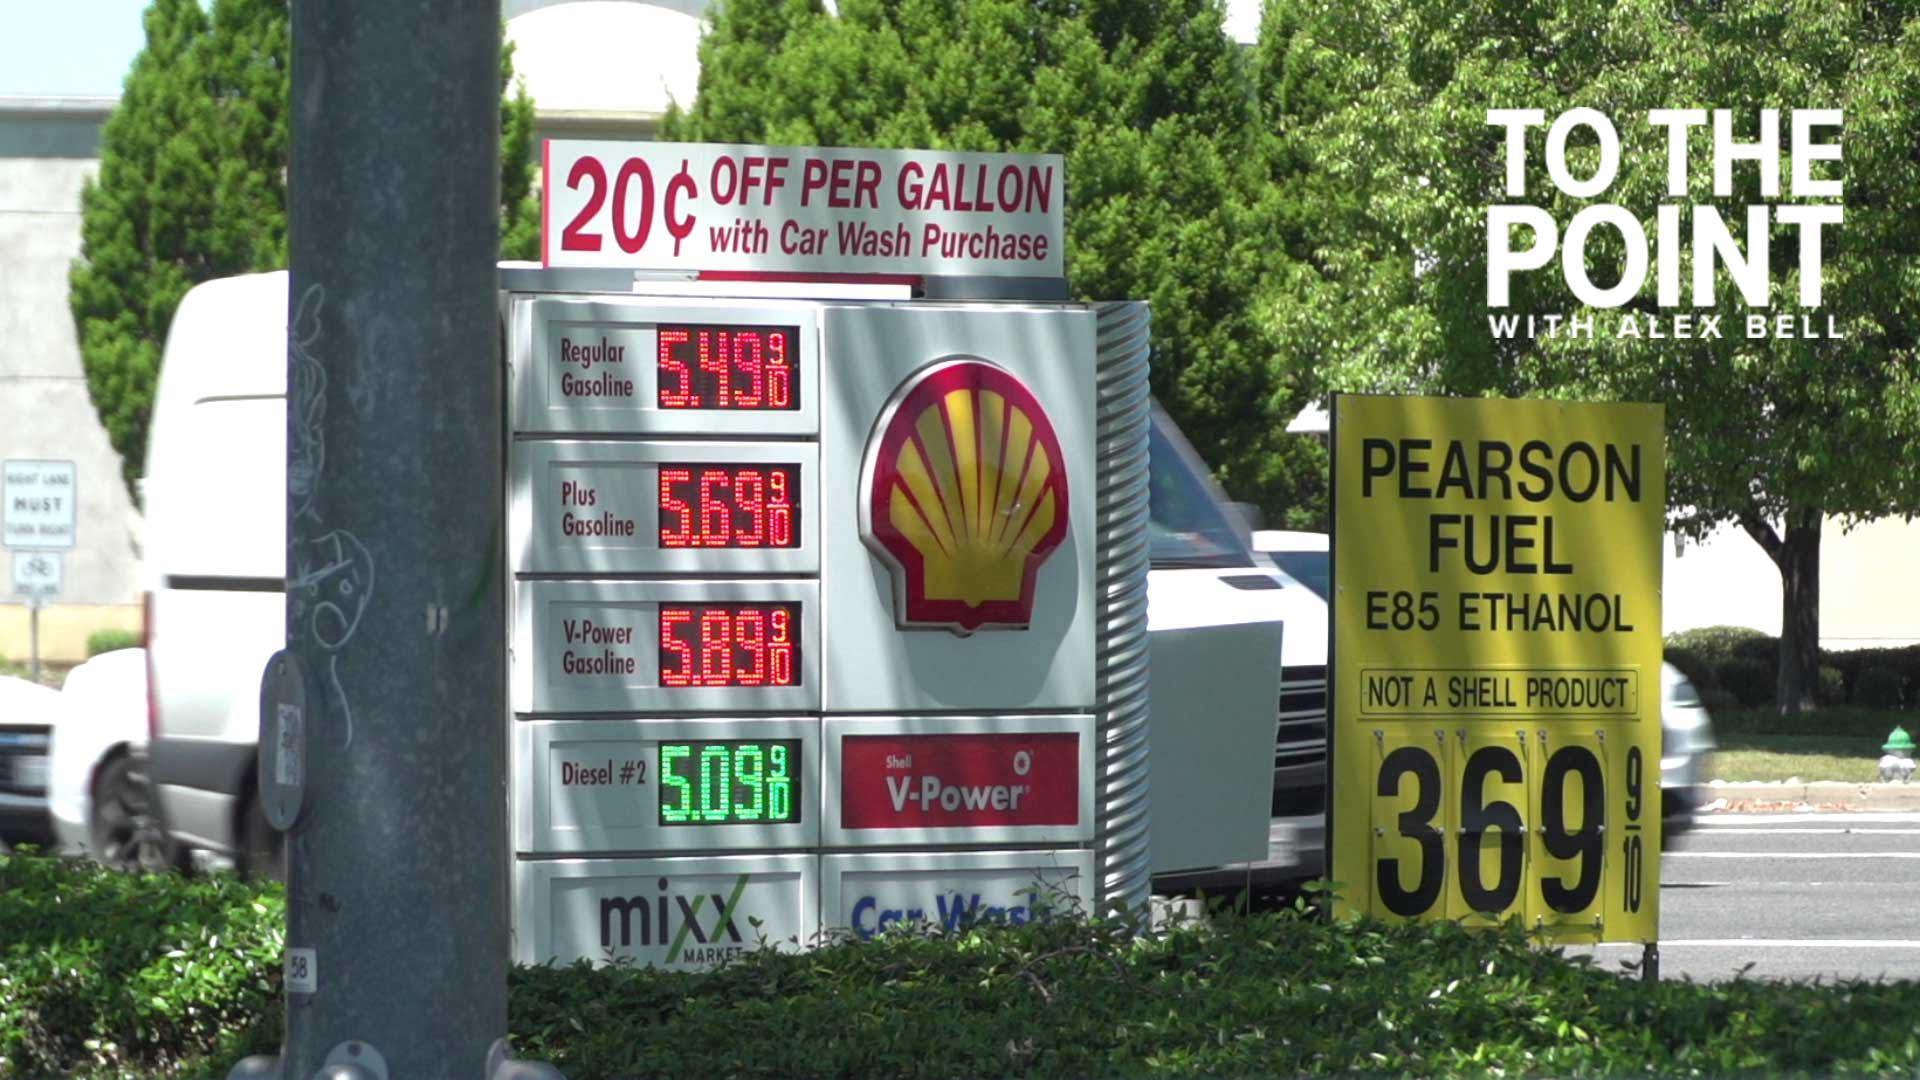 California Energy Commission meets to hold oil industry accountable as gas prices remain high